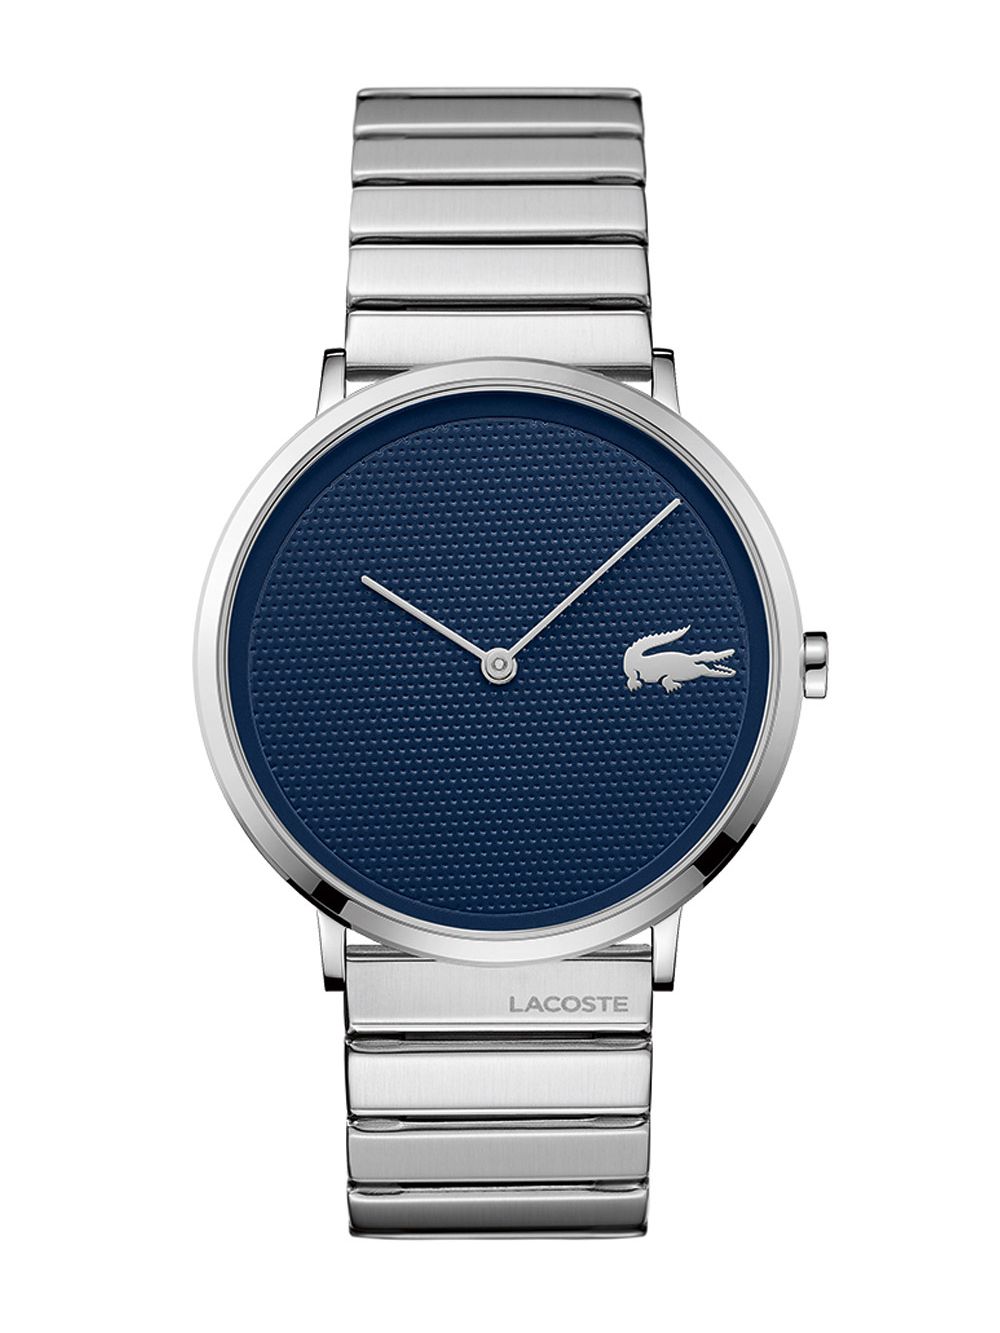 black and blue lacoste watch